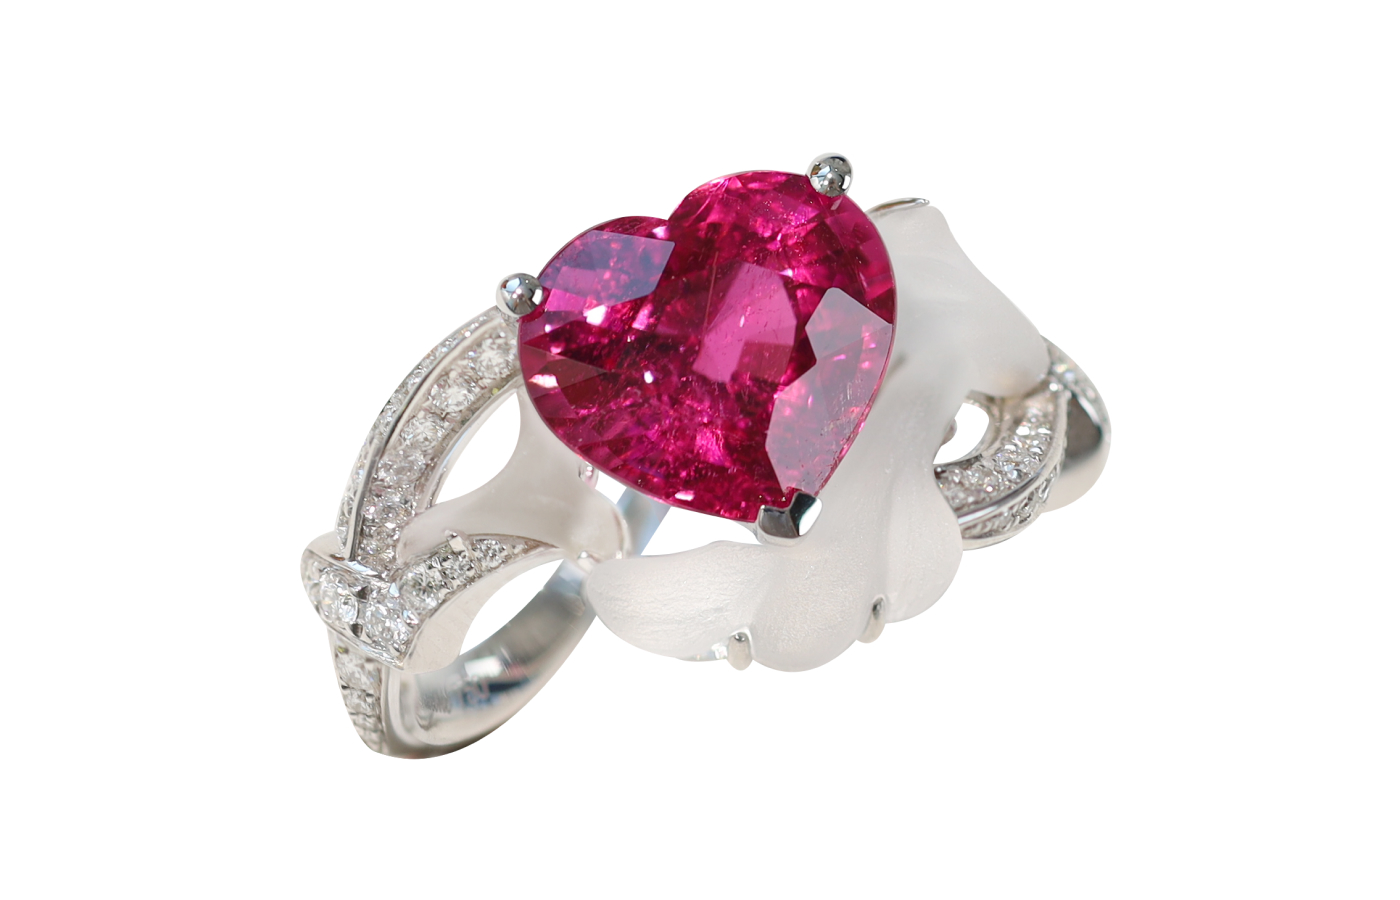 Simone Jewels Portraits of Porcelain ring with a heart-shaped rubellite tourmaline, white quartz and diamonds in 18k white gold 